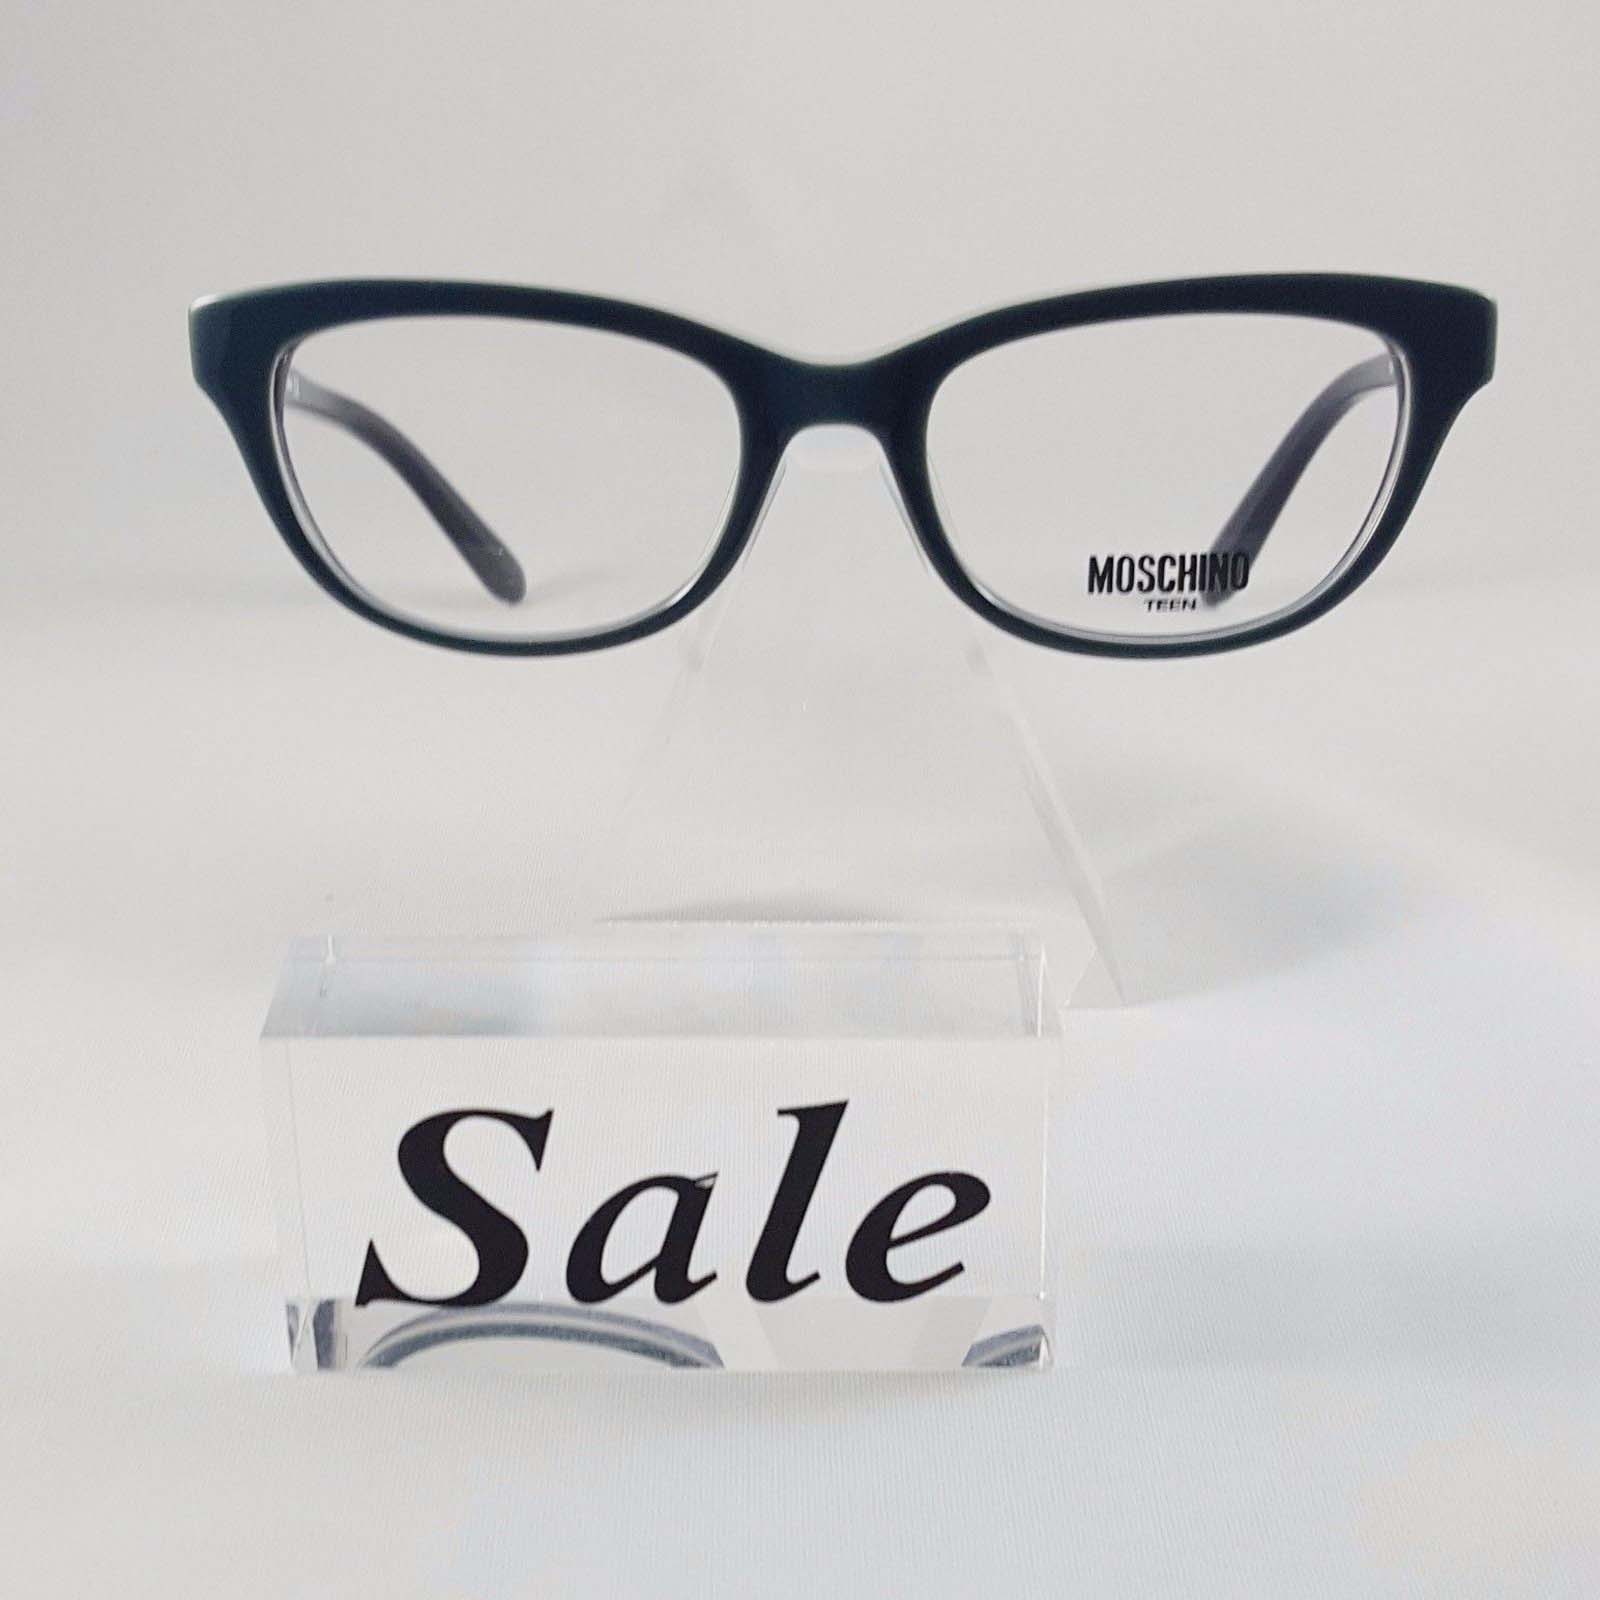 New Moschino Blue Mint Eyeglasses Rx Glasses Made in Italy MO235V04 48 ...